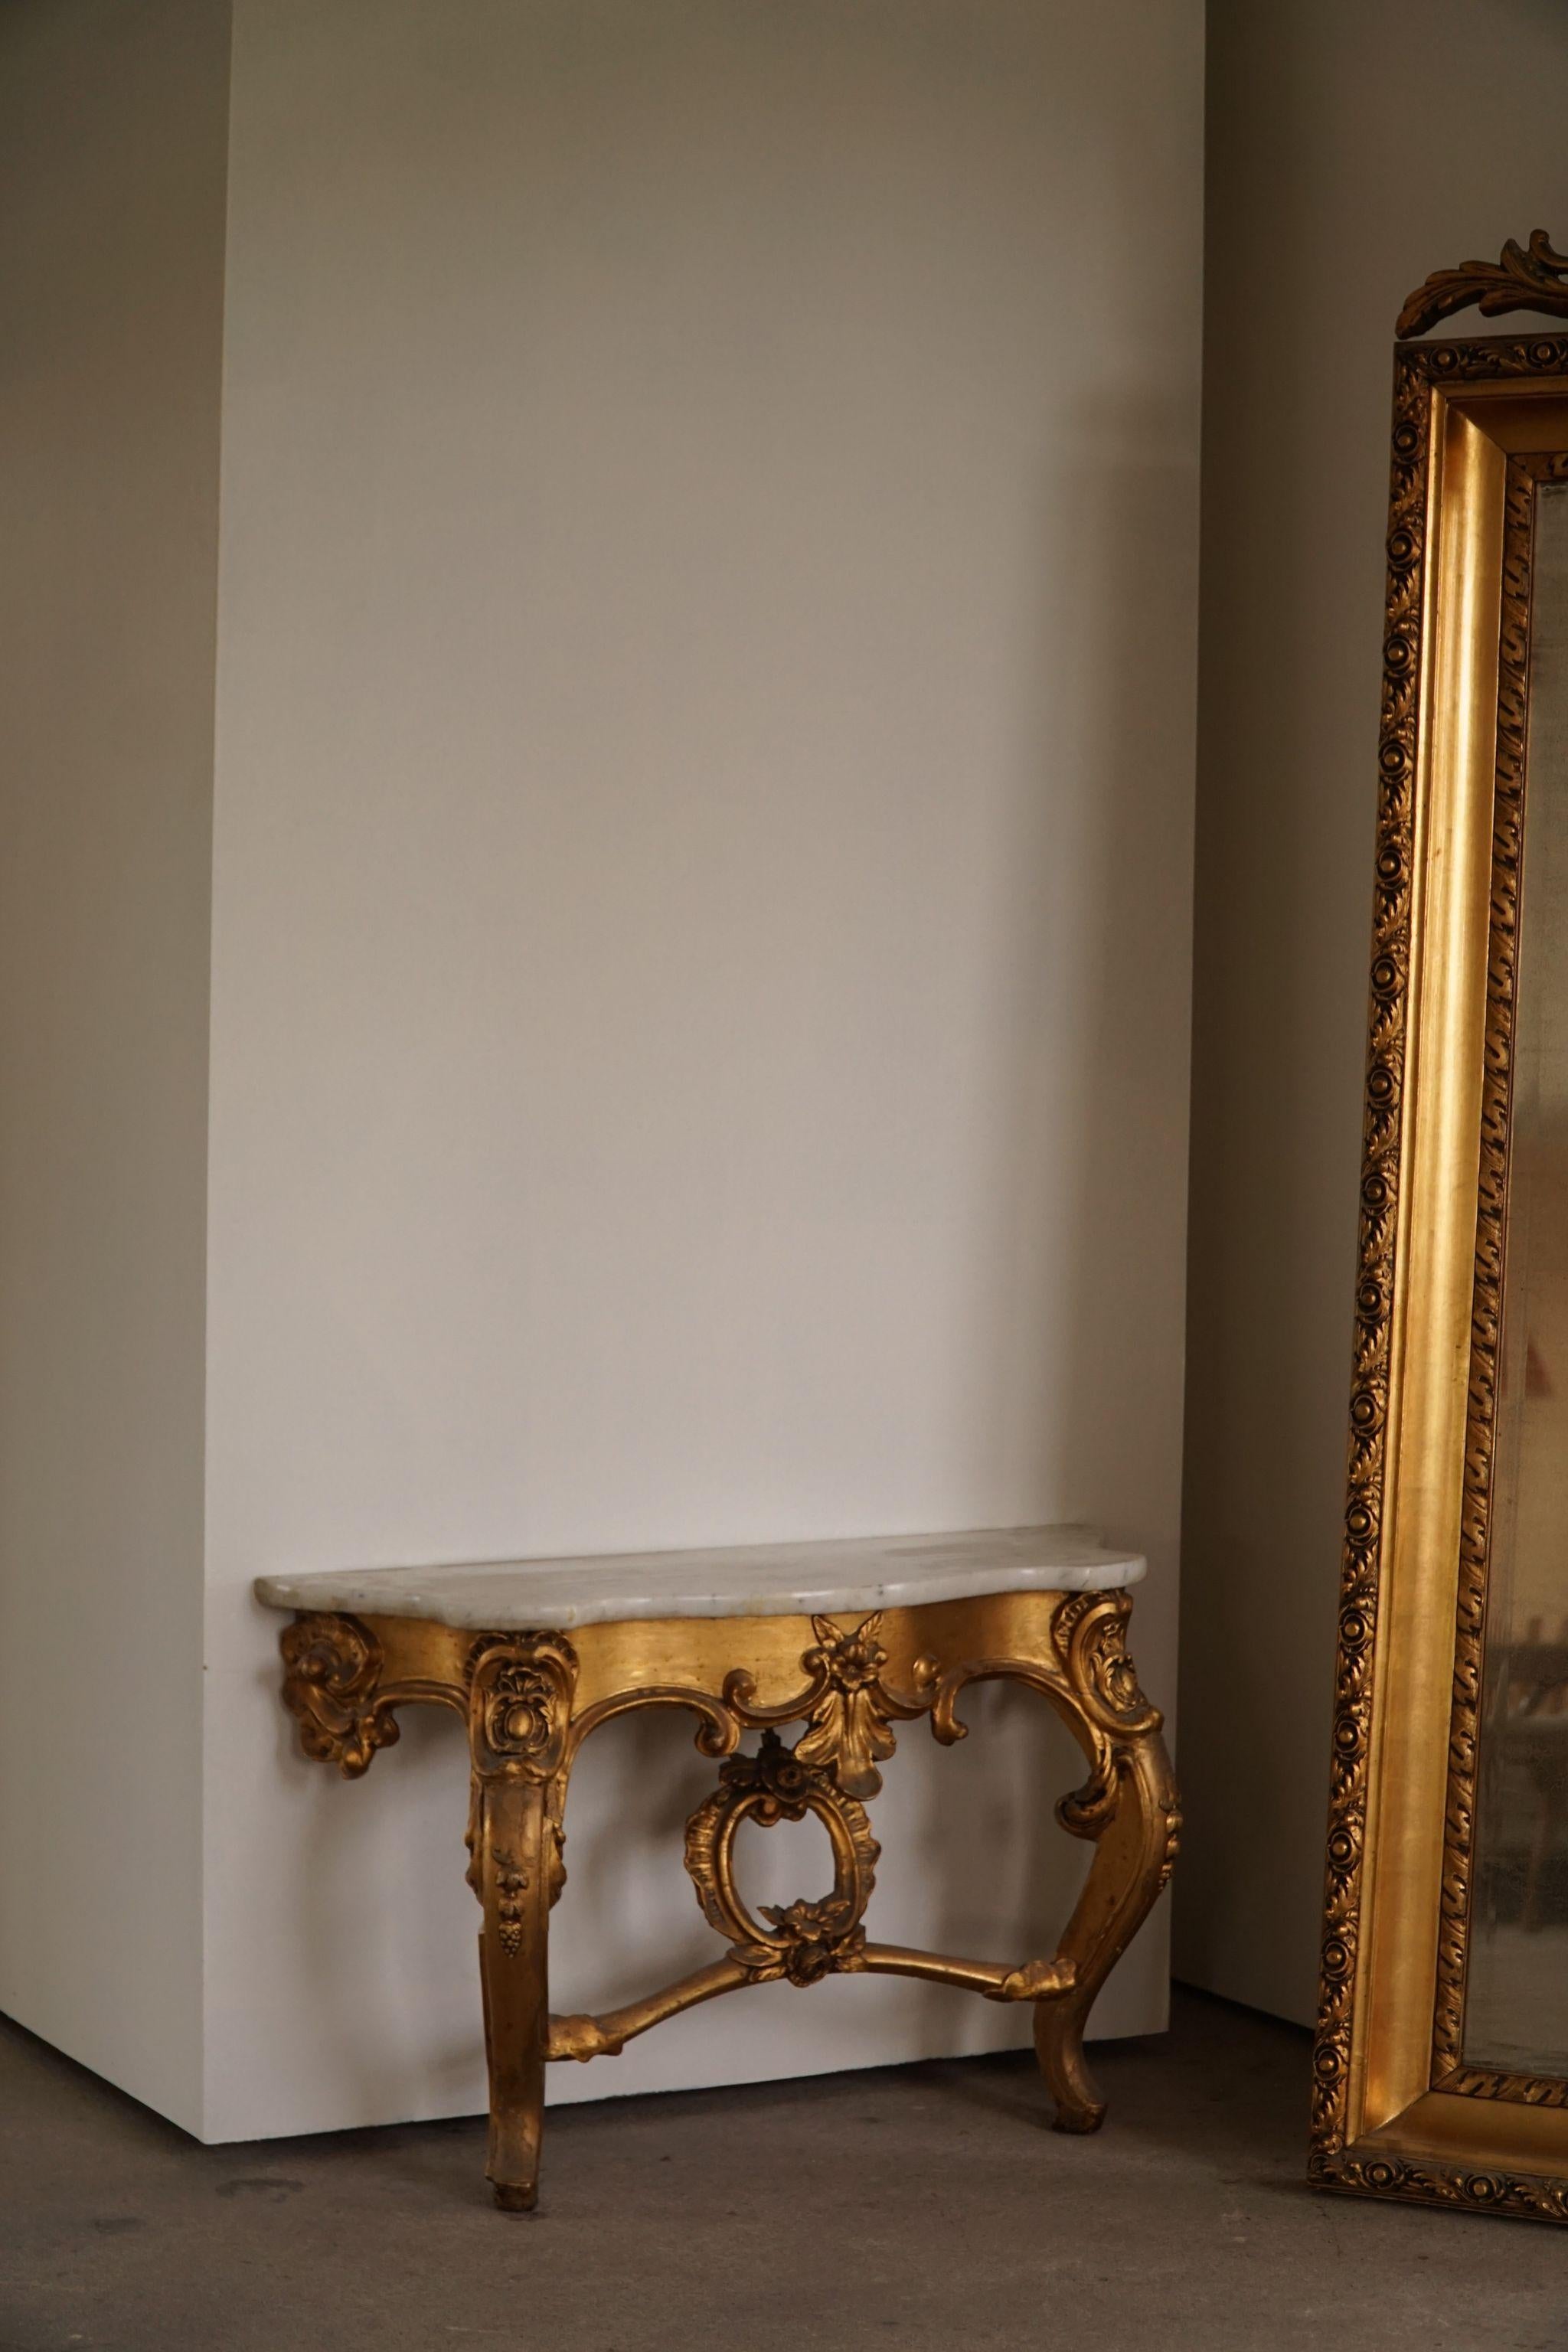 Antique Danish Mid-19th Century Rococo Gold Plated Mirror For Sale 1